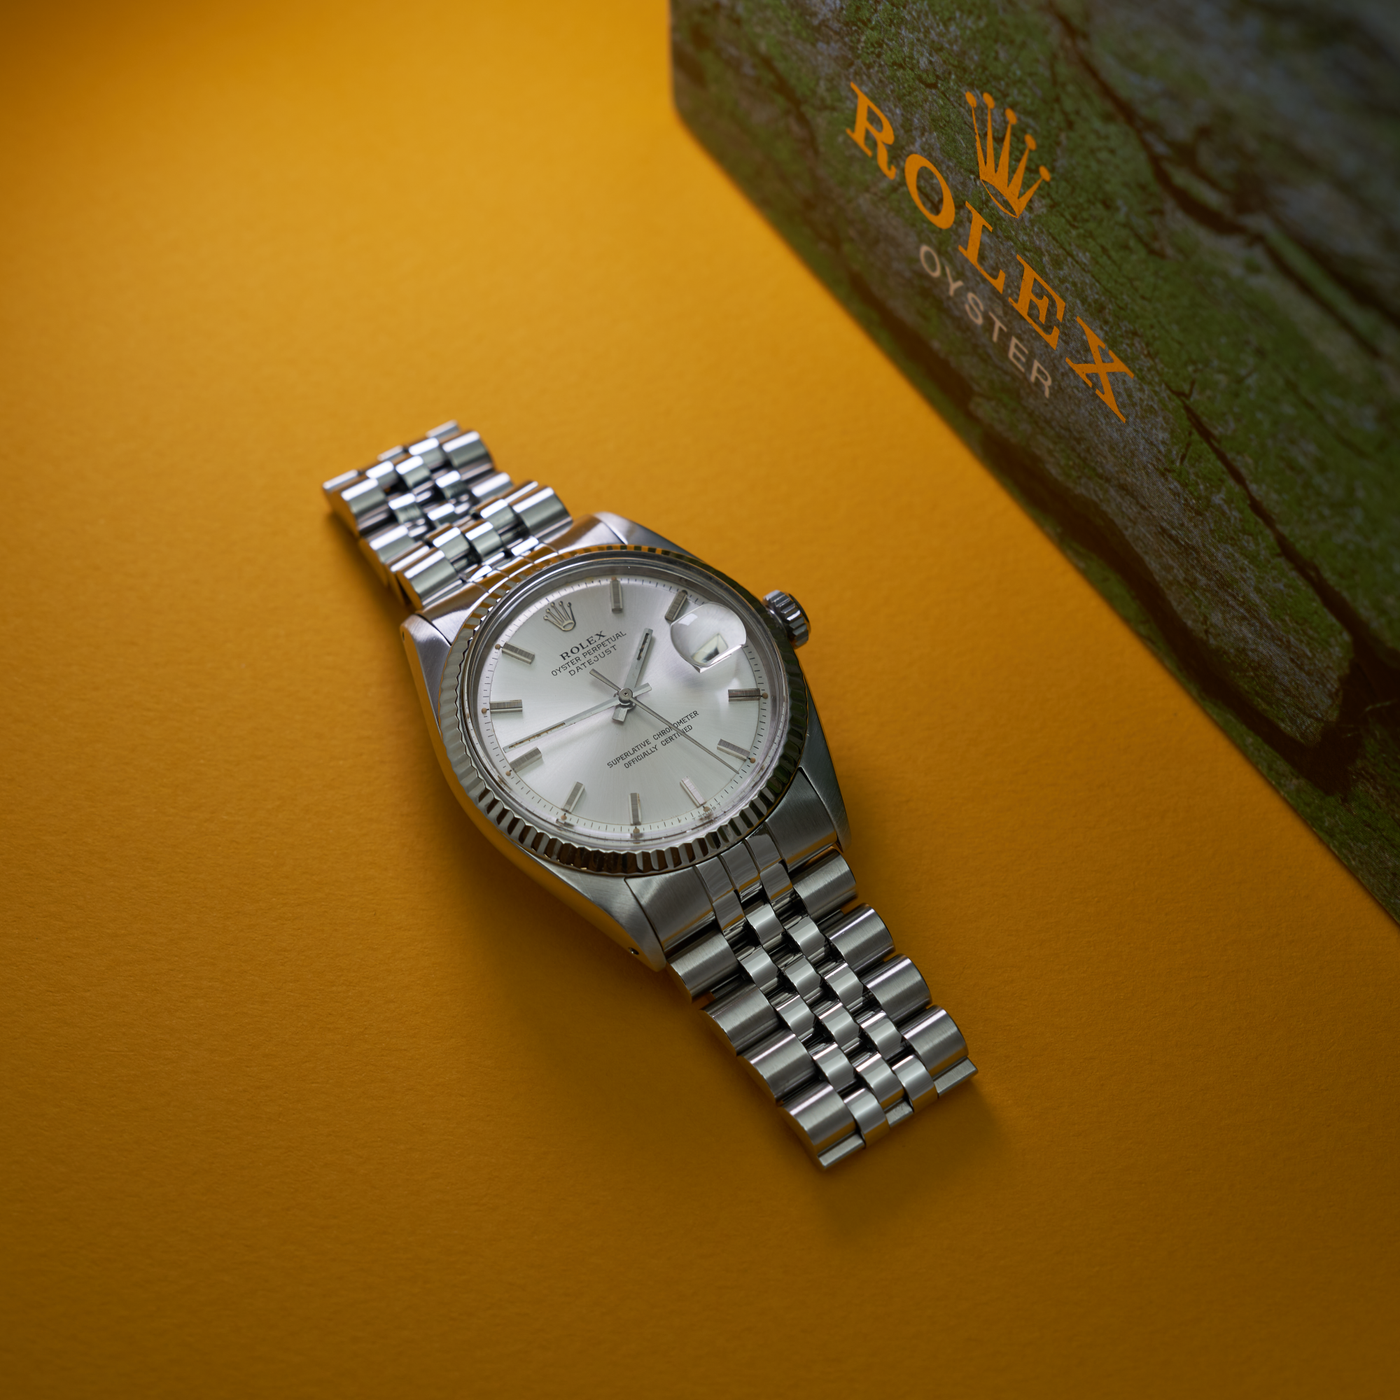 Rolex Oyster Perpetual Datejust (sold)